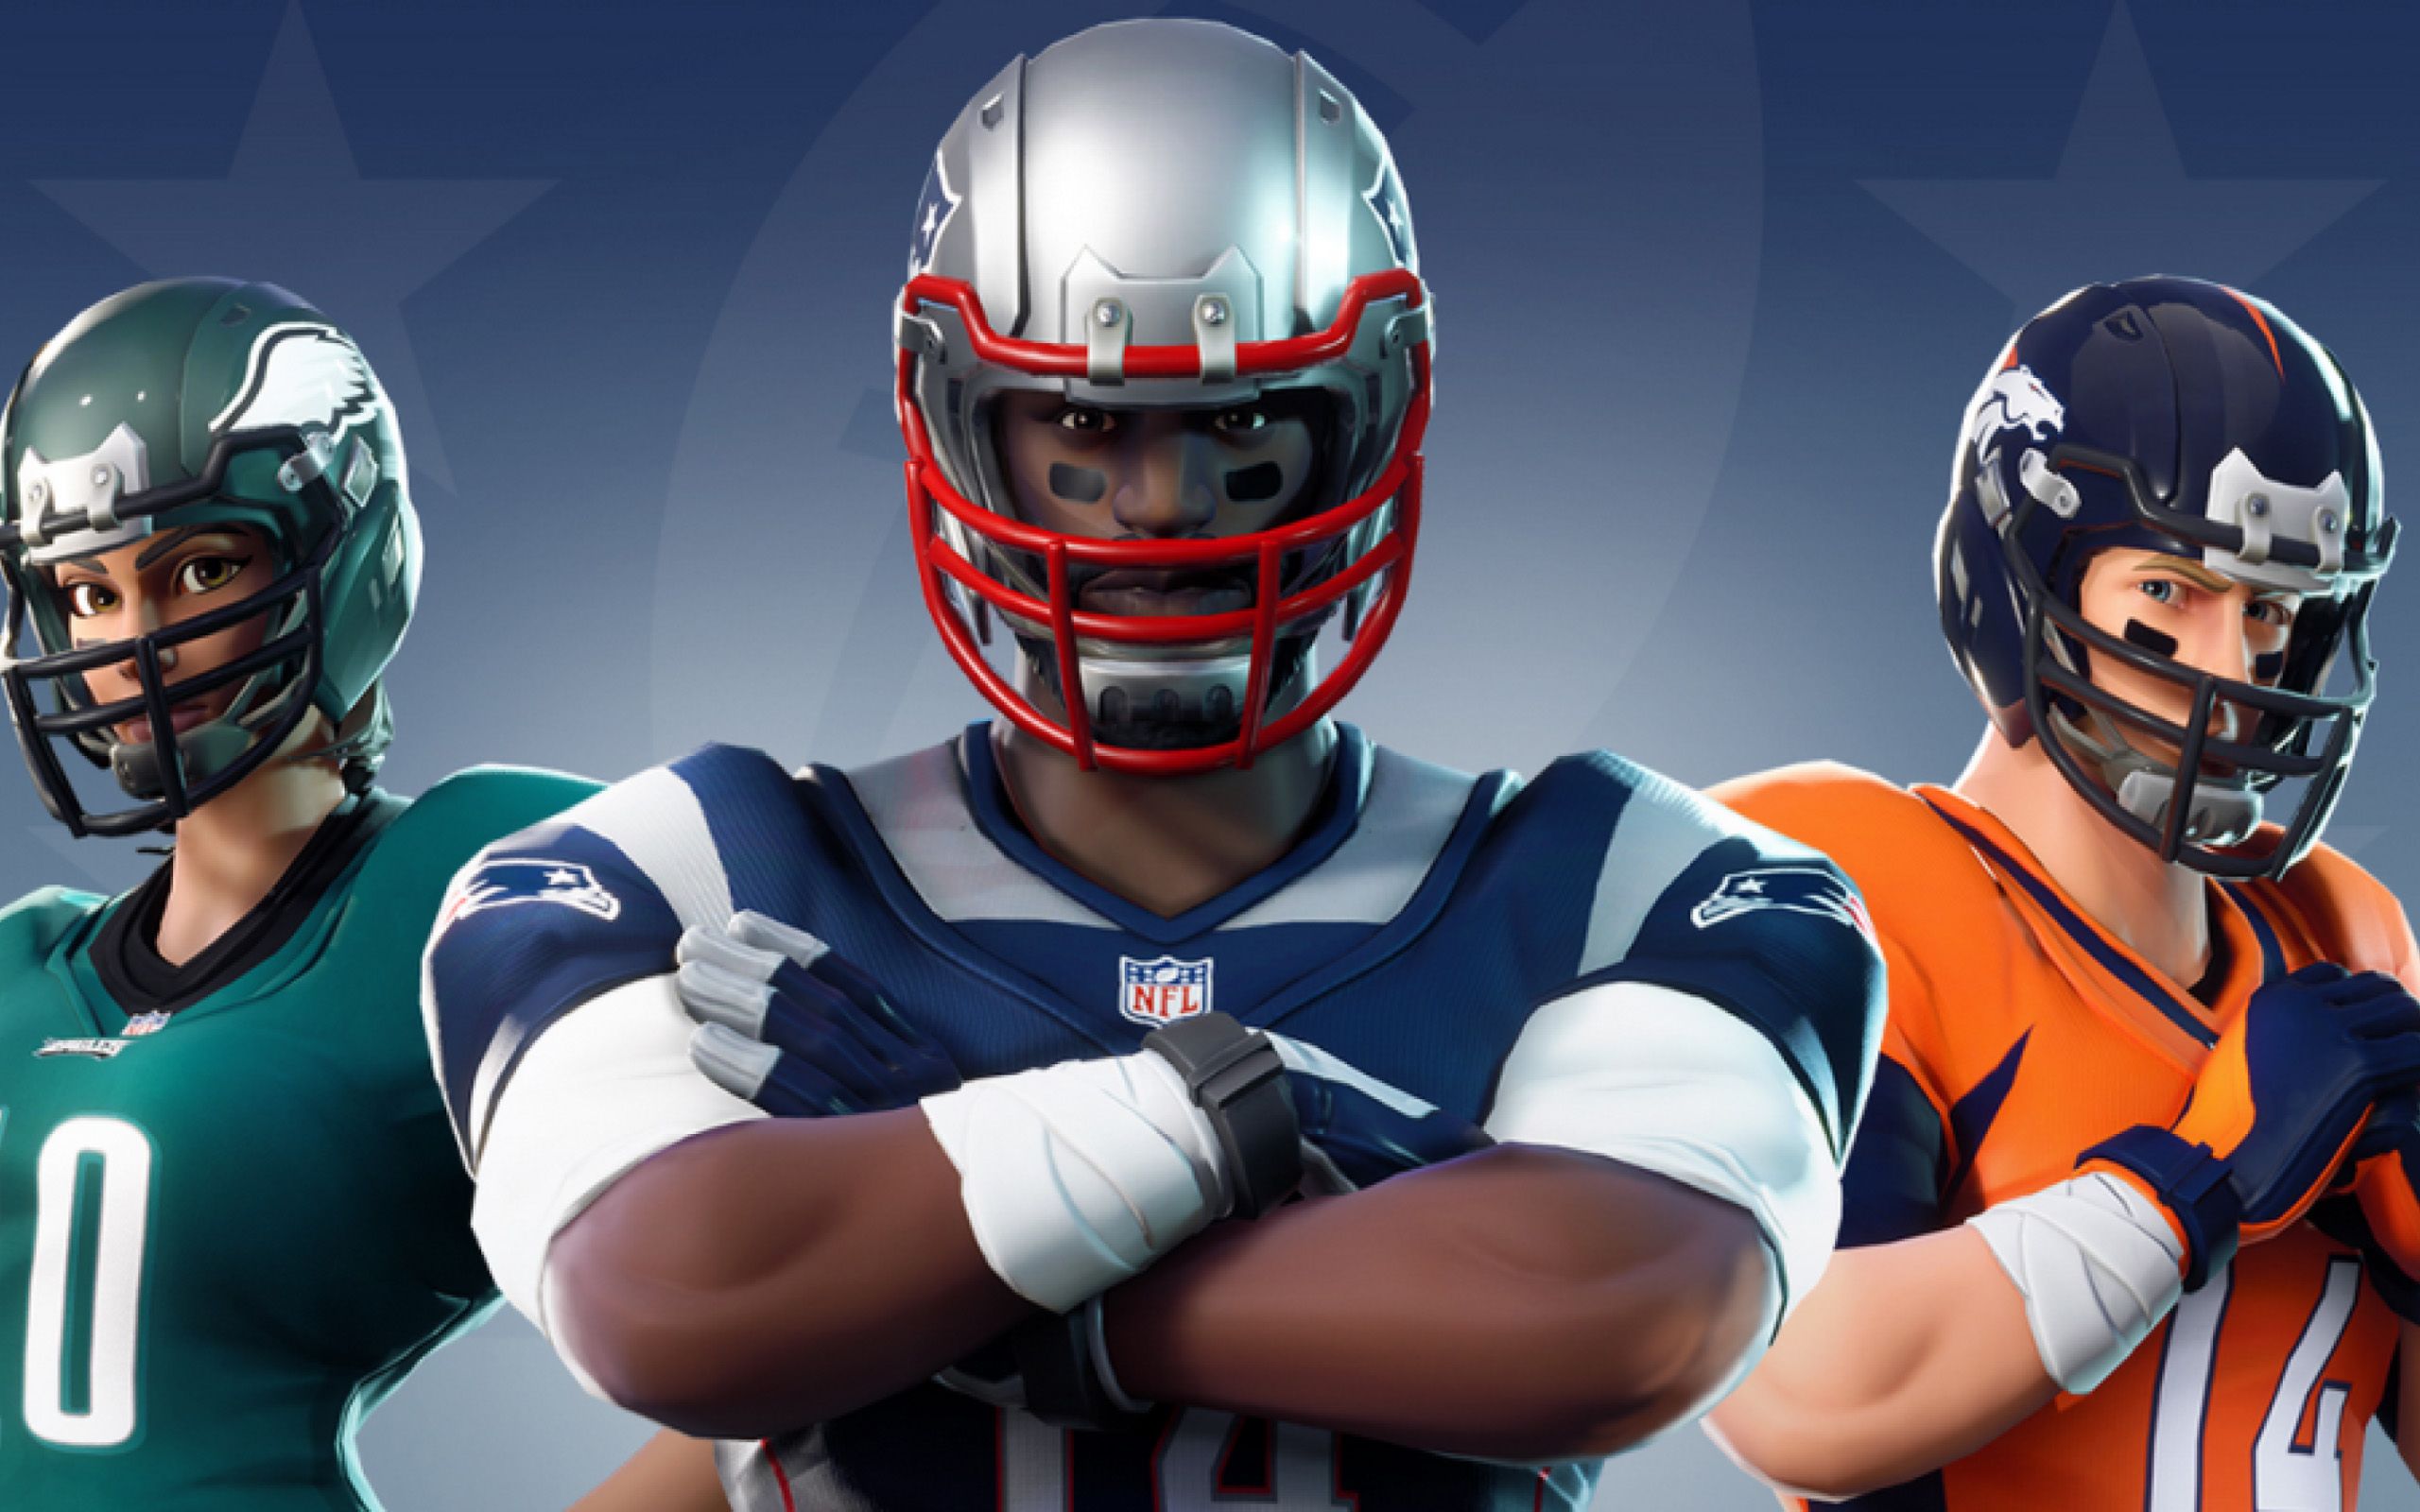 Download wallpaper NFL Team, 2020 games, Fortnite Battle Royale, NFL Skins, Fortnite, NFL Team Fortnite for desktop with resolution 2560x1600. High Quality HD picture wallpaper